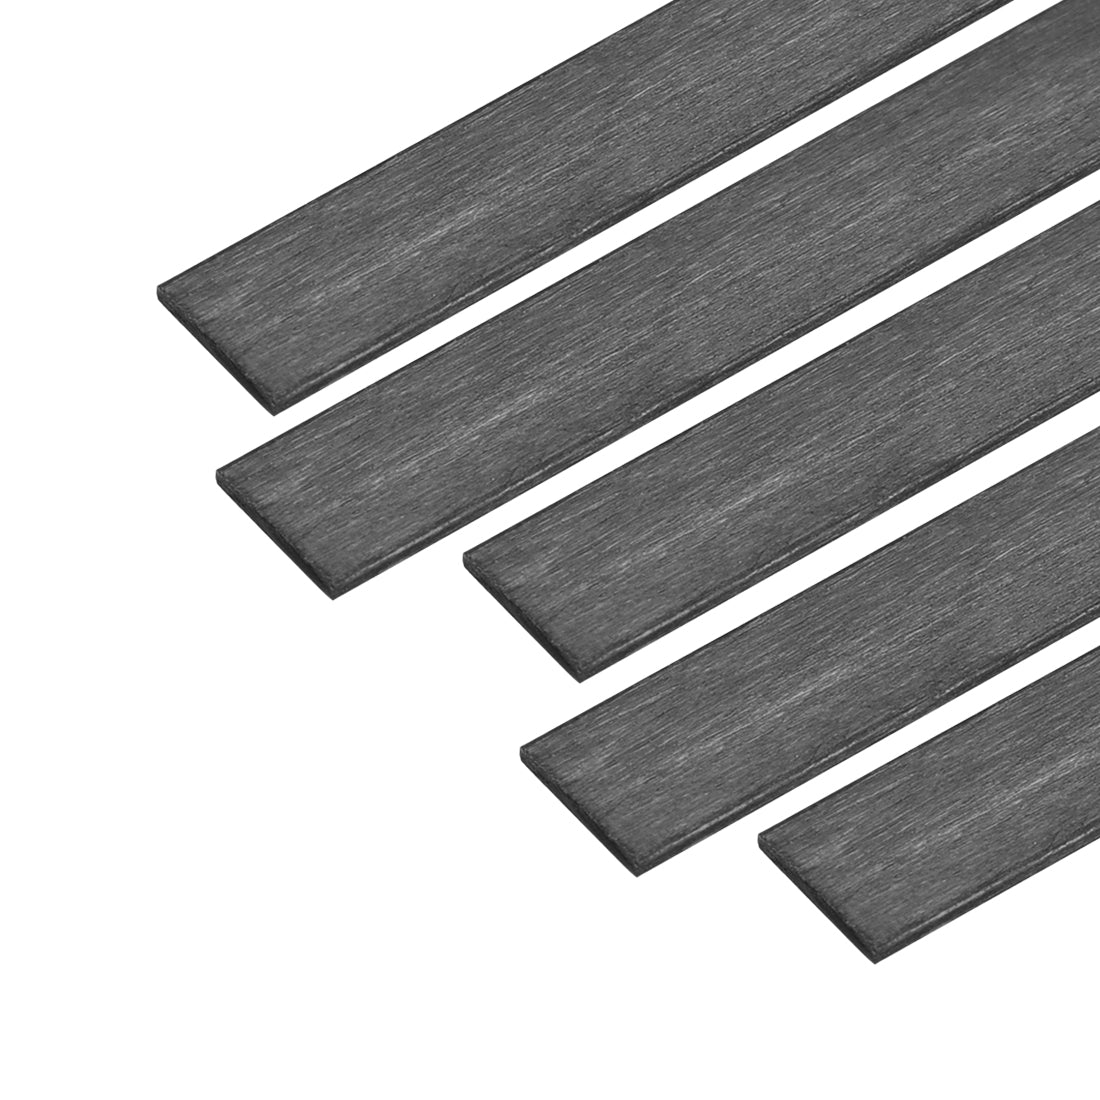 uxcell Uxcell Carbon Fiber Strip Bars 0.6x5mm 200mm Length Pultruded Carbon Fiber Strips for Kites, RC Airplane 5 Pcs